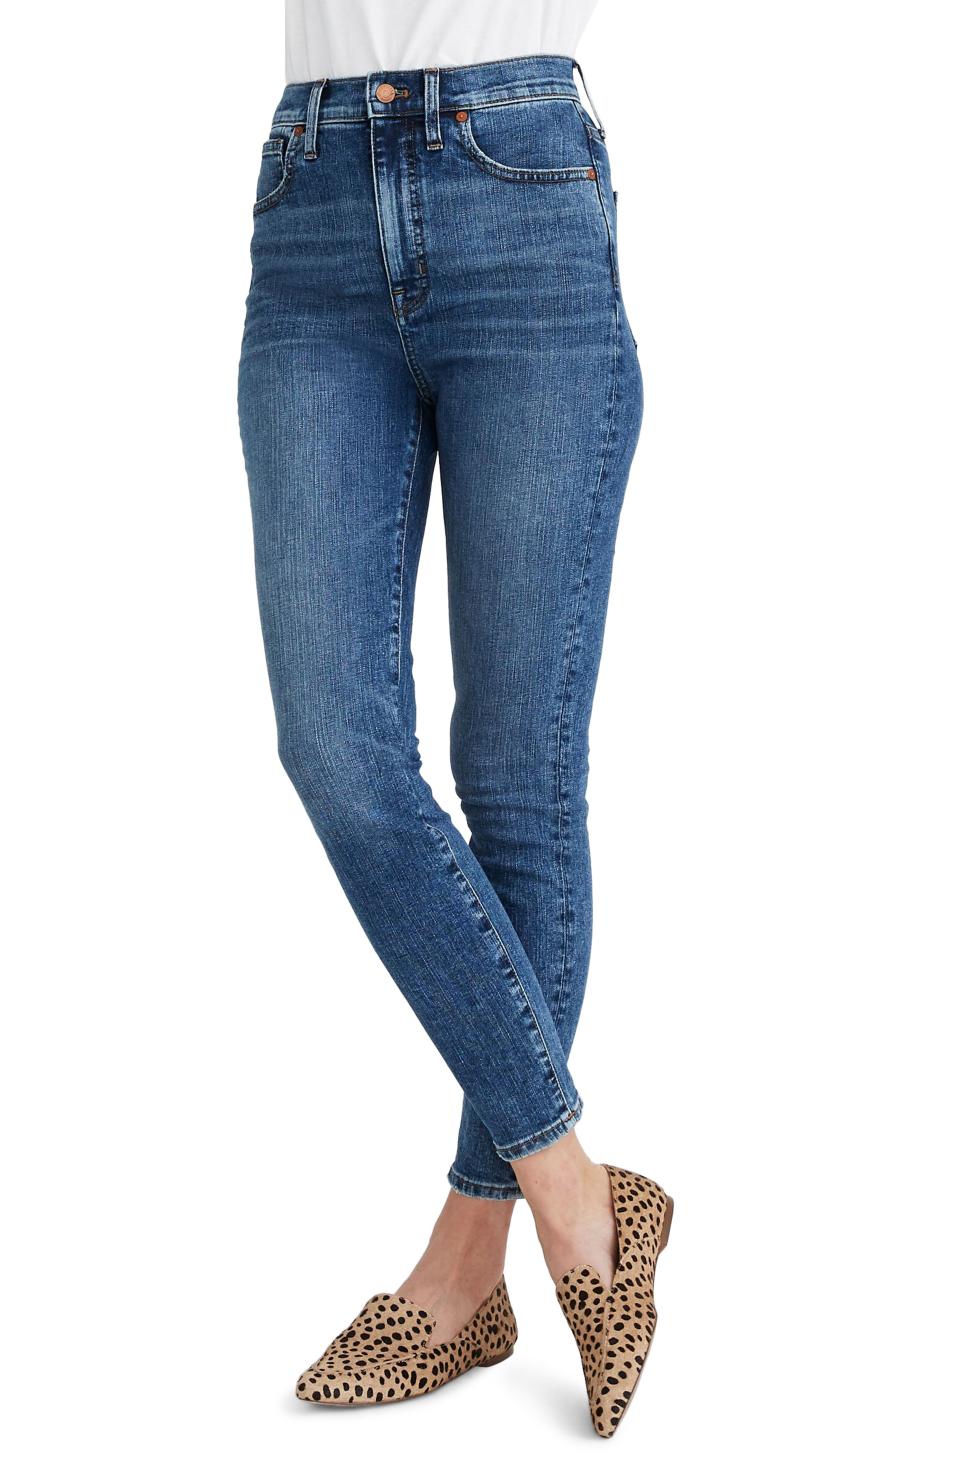 Get the lived-in look for spring with these distressed Madewell jeans. 